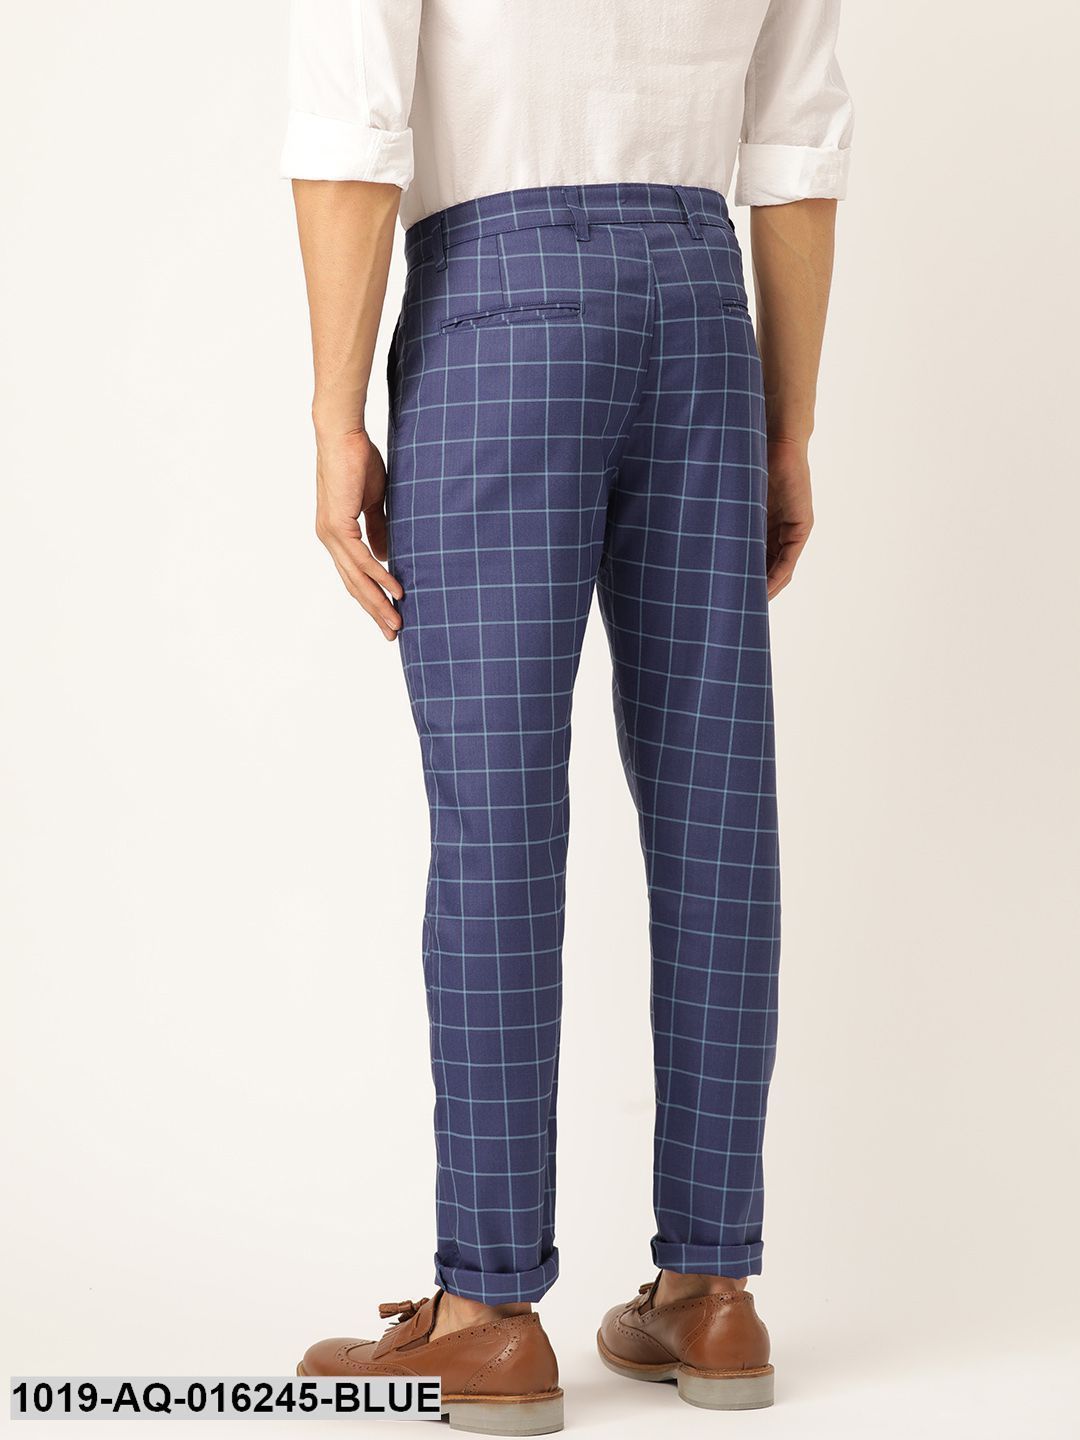 Cotton Mens Checkered Trousers Pattern  Checked Occasion  Casual Wear  Formal Wear at Rs 600  Piece in Bharatpur